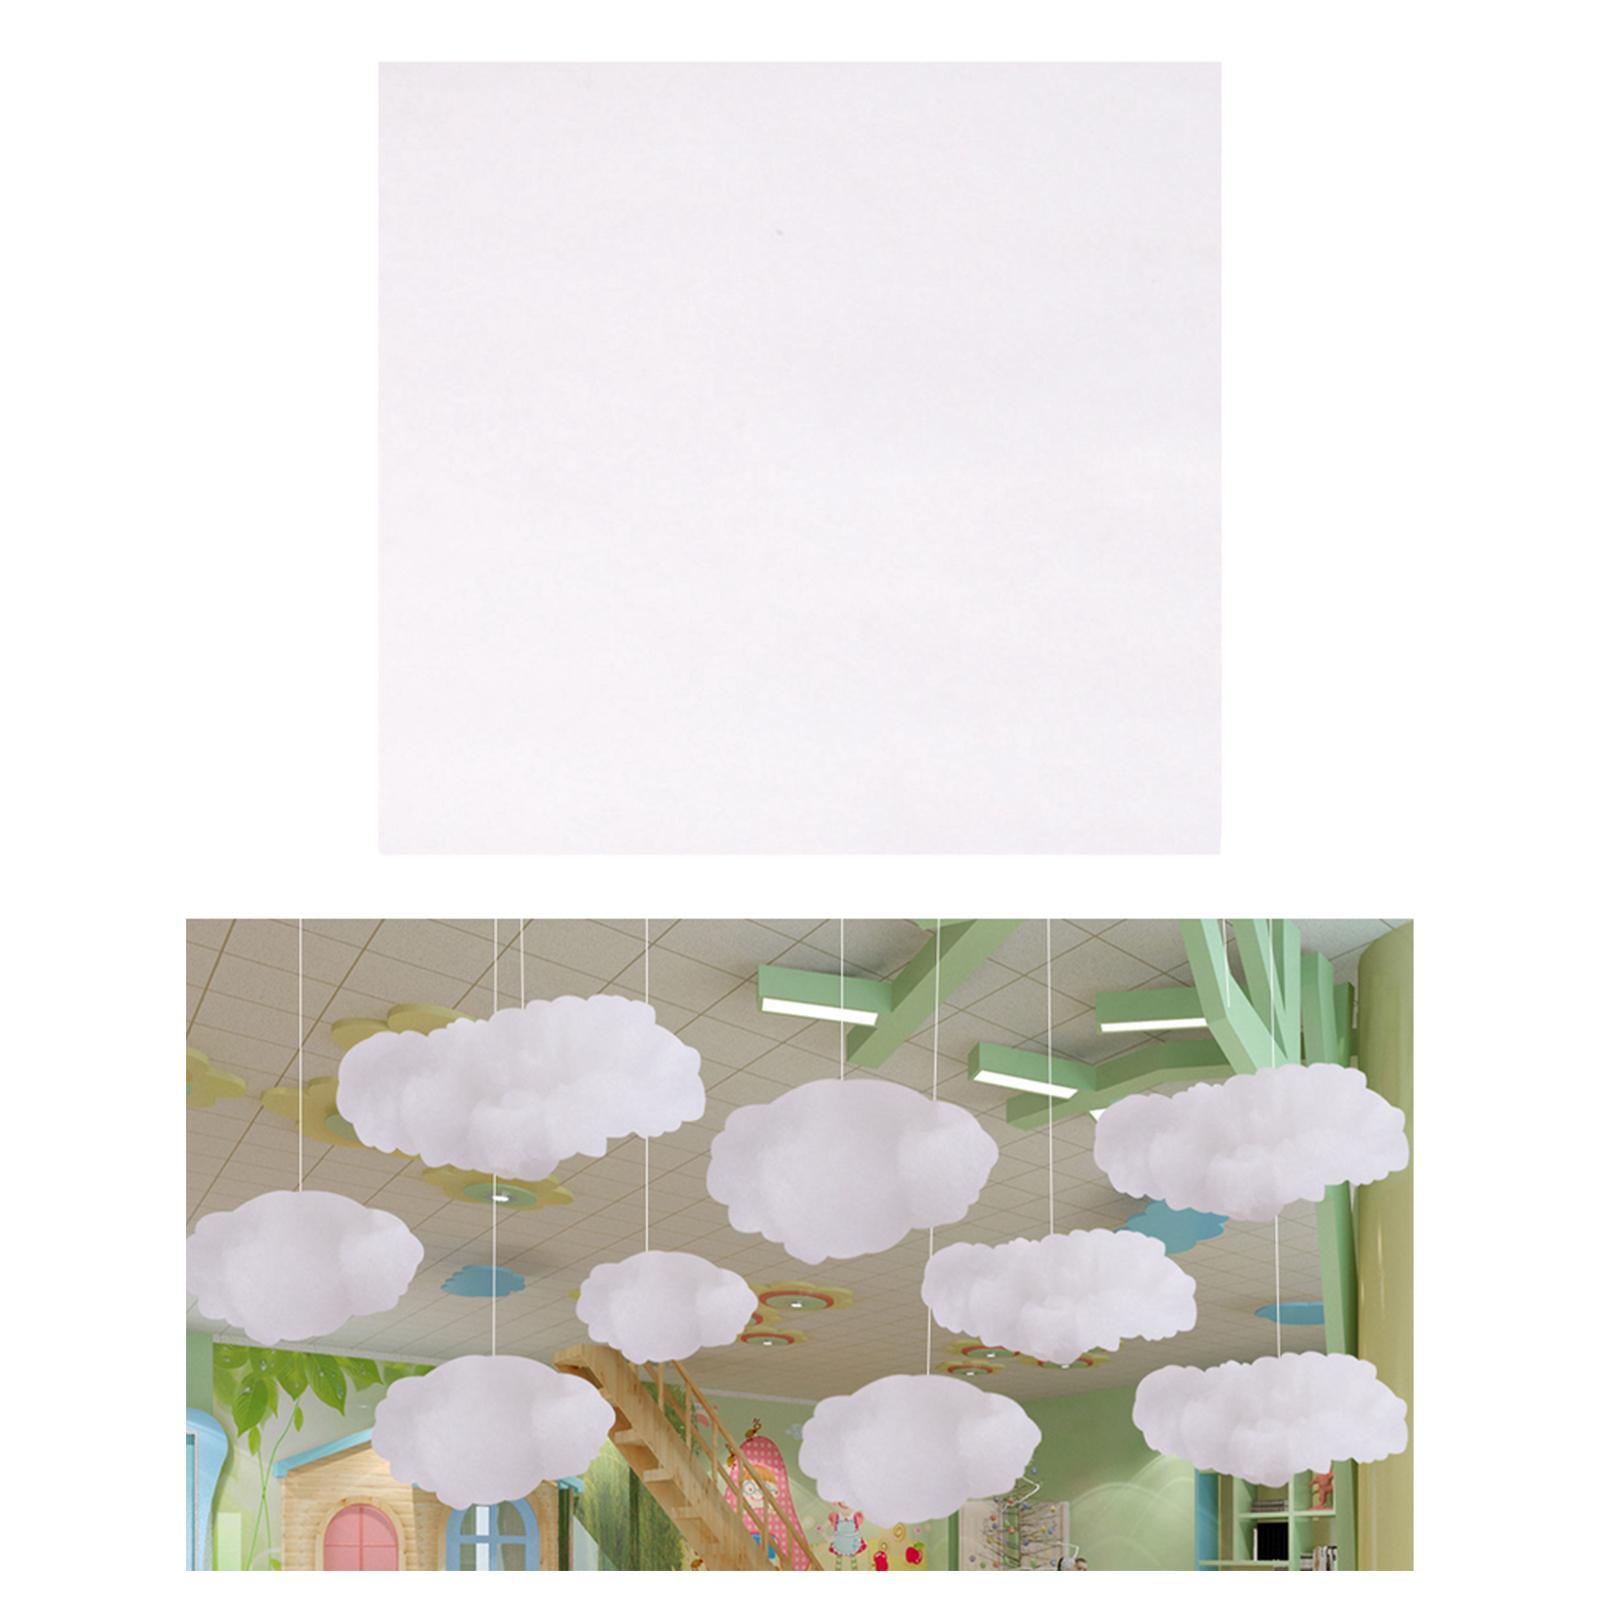 Artificial Snow DIY Clouds Covering Fake Snow Blanket for Shopping Mall Tree